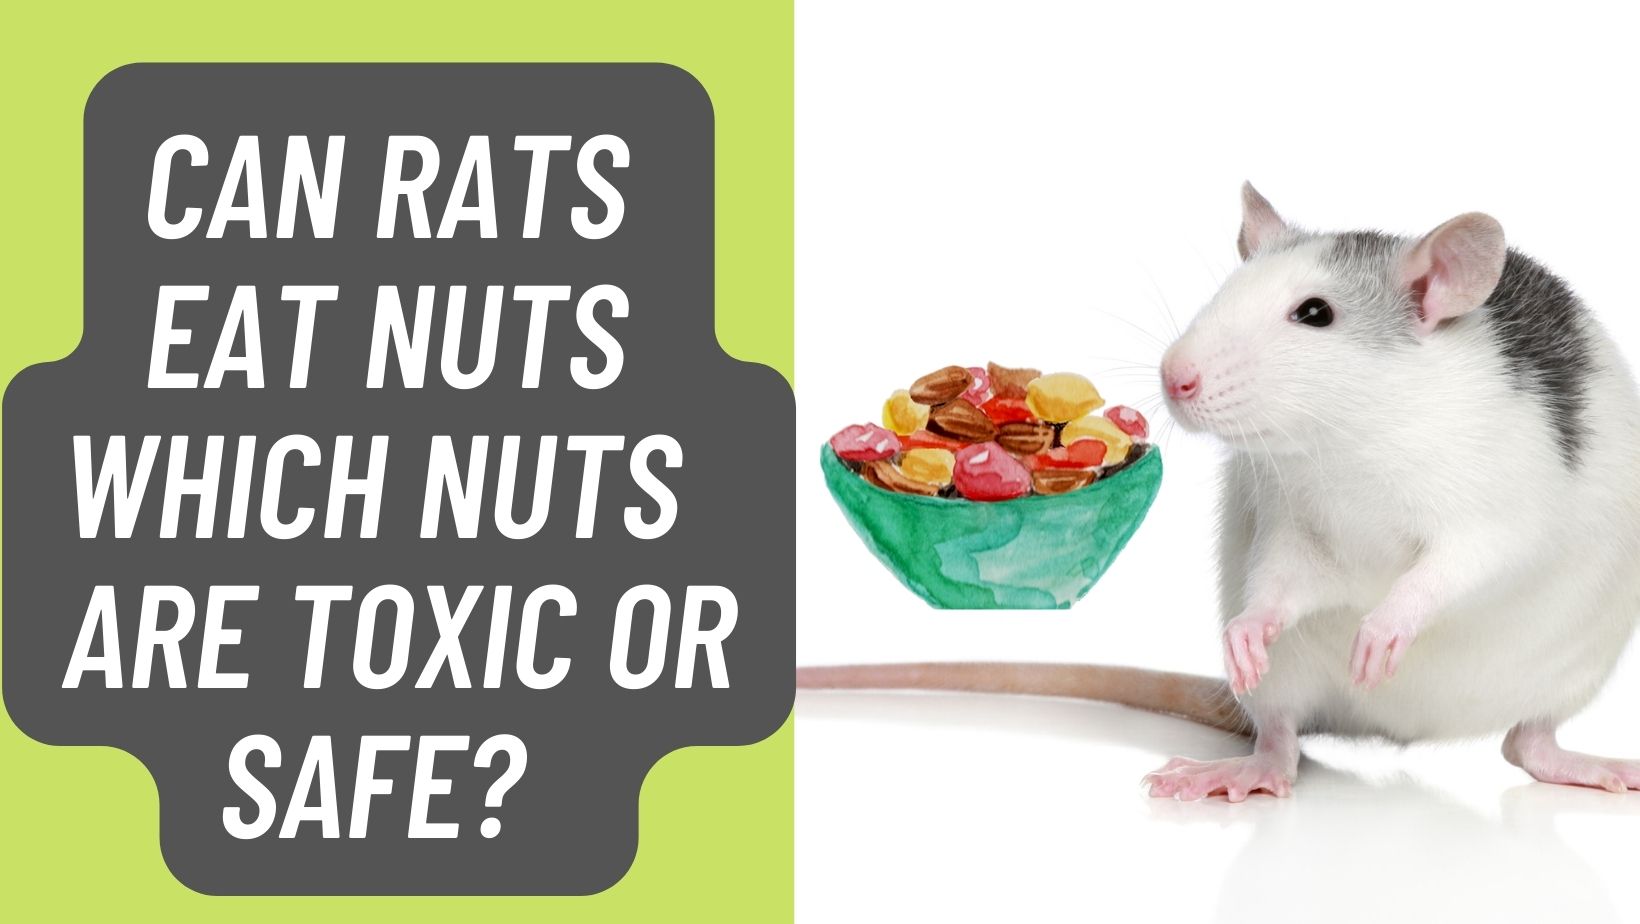 Can Rats Eat Nuts Or Are They Toxic?